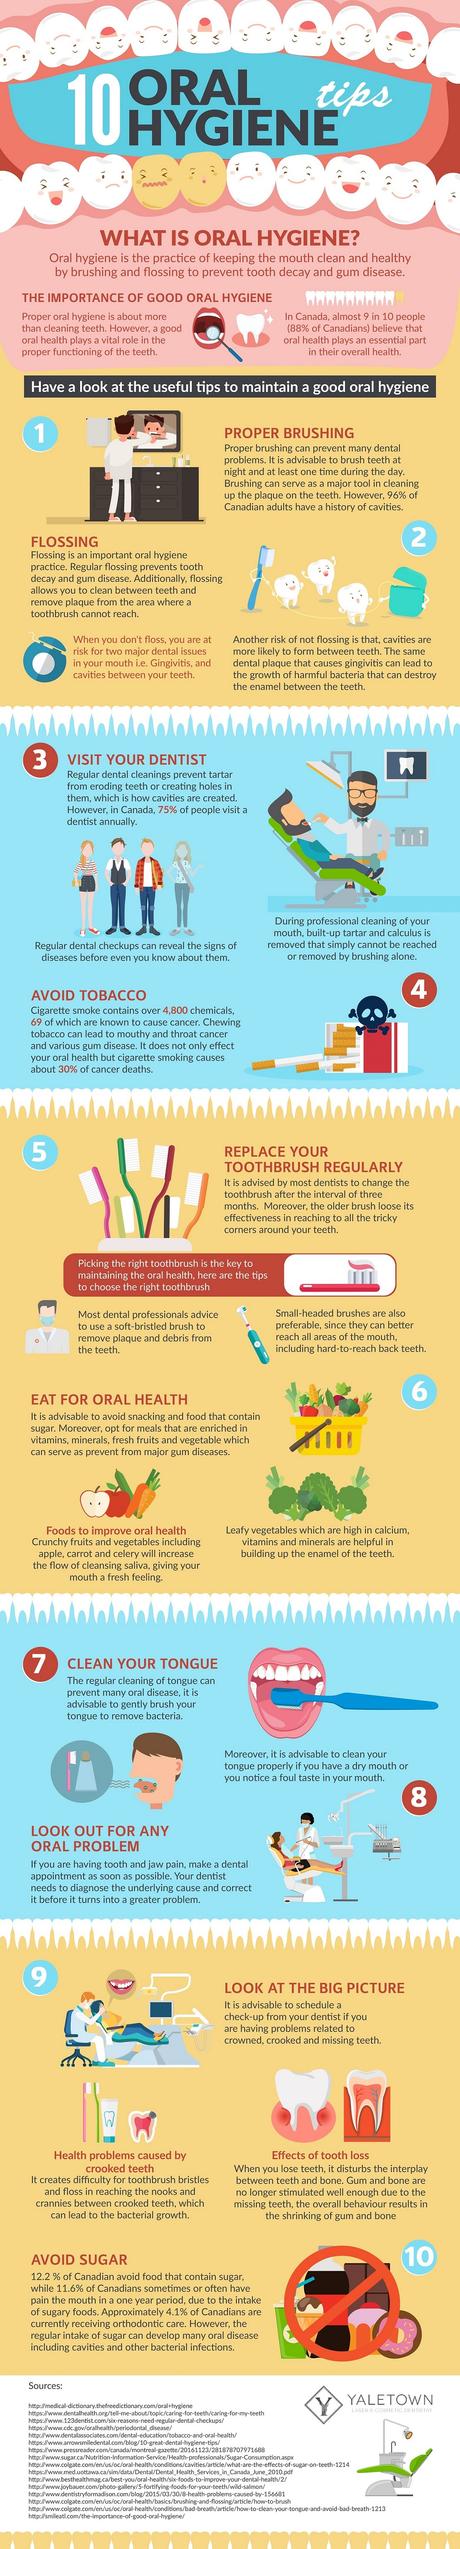 10 Great Oral Hygiene Tips For a Healthy Mouth